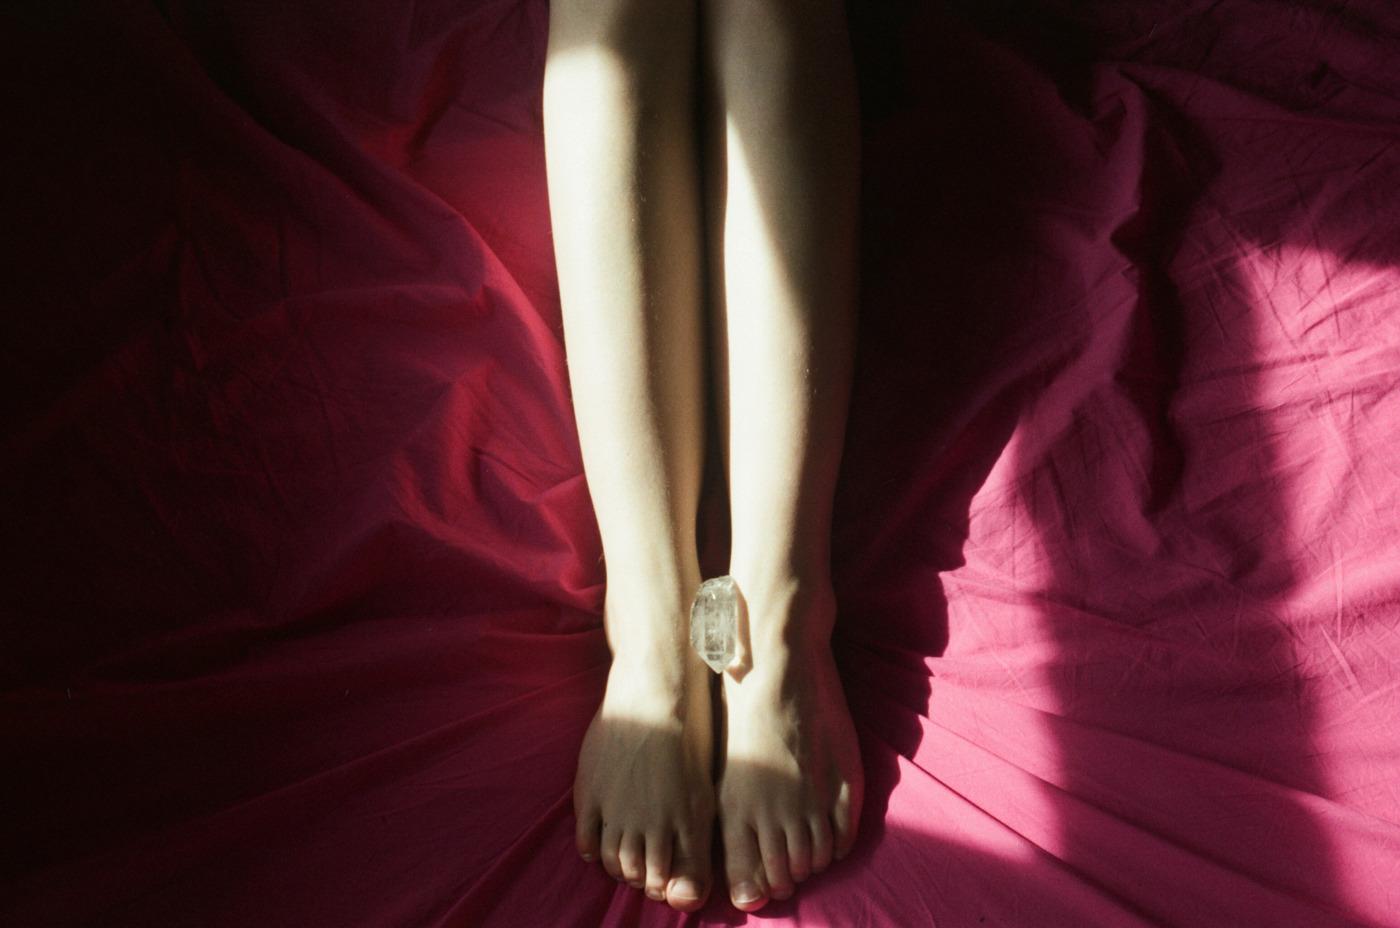 “a photoof a piece of crystal is placed between a woman’s feet who is in bed on red bedsheets from Lina Scheynius photo-essay for Tabayer jewelry Tabayer jewellery”